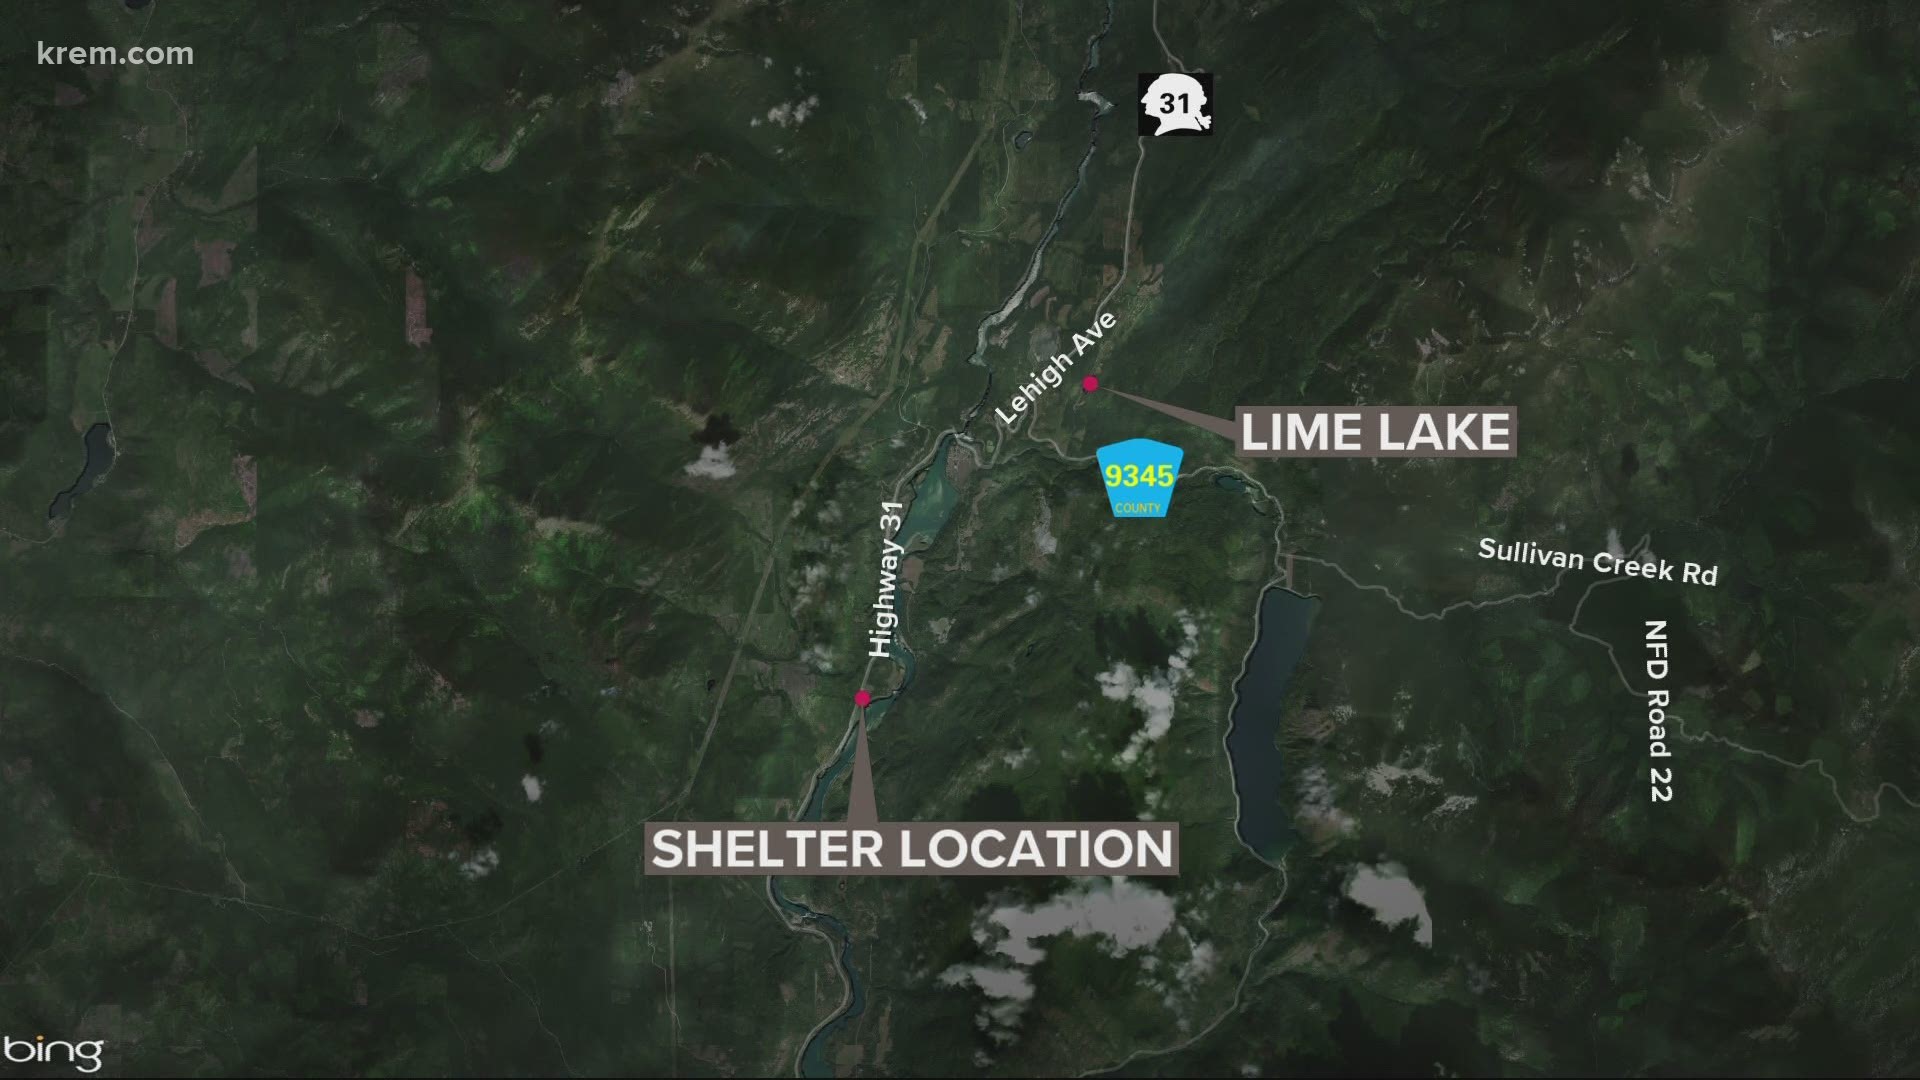 Fire near Lime Lake forces people in the area to evacuate